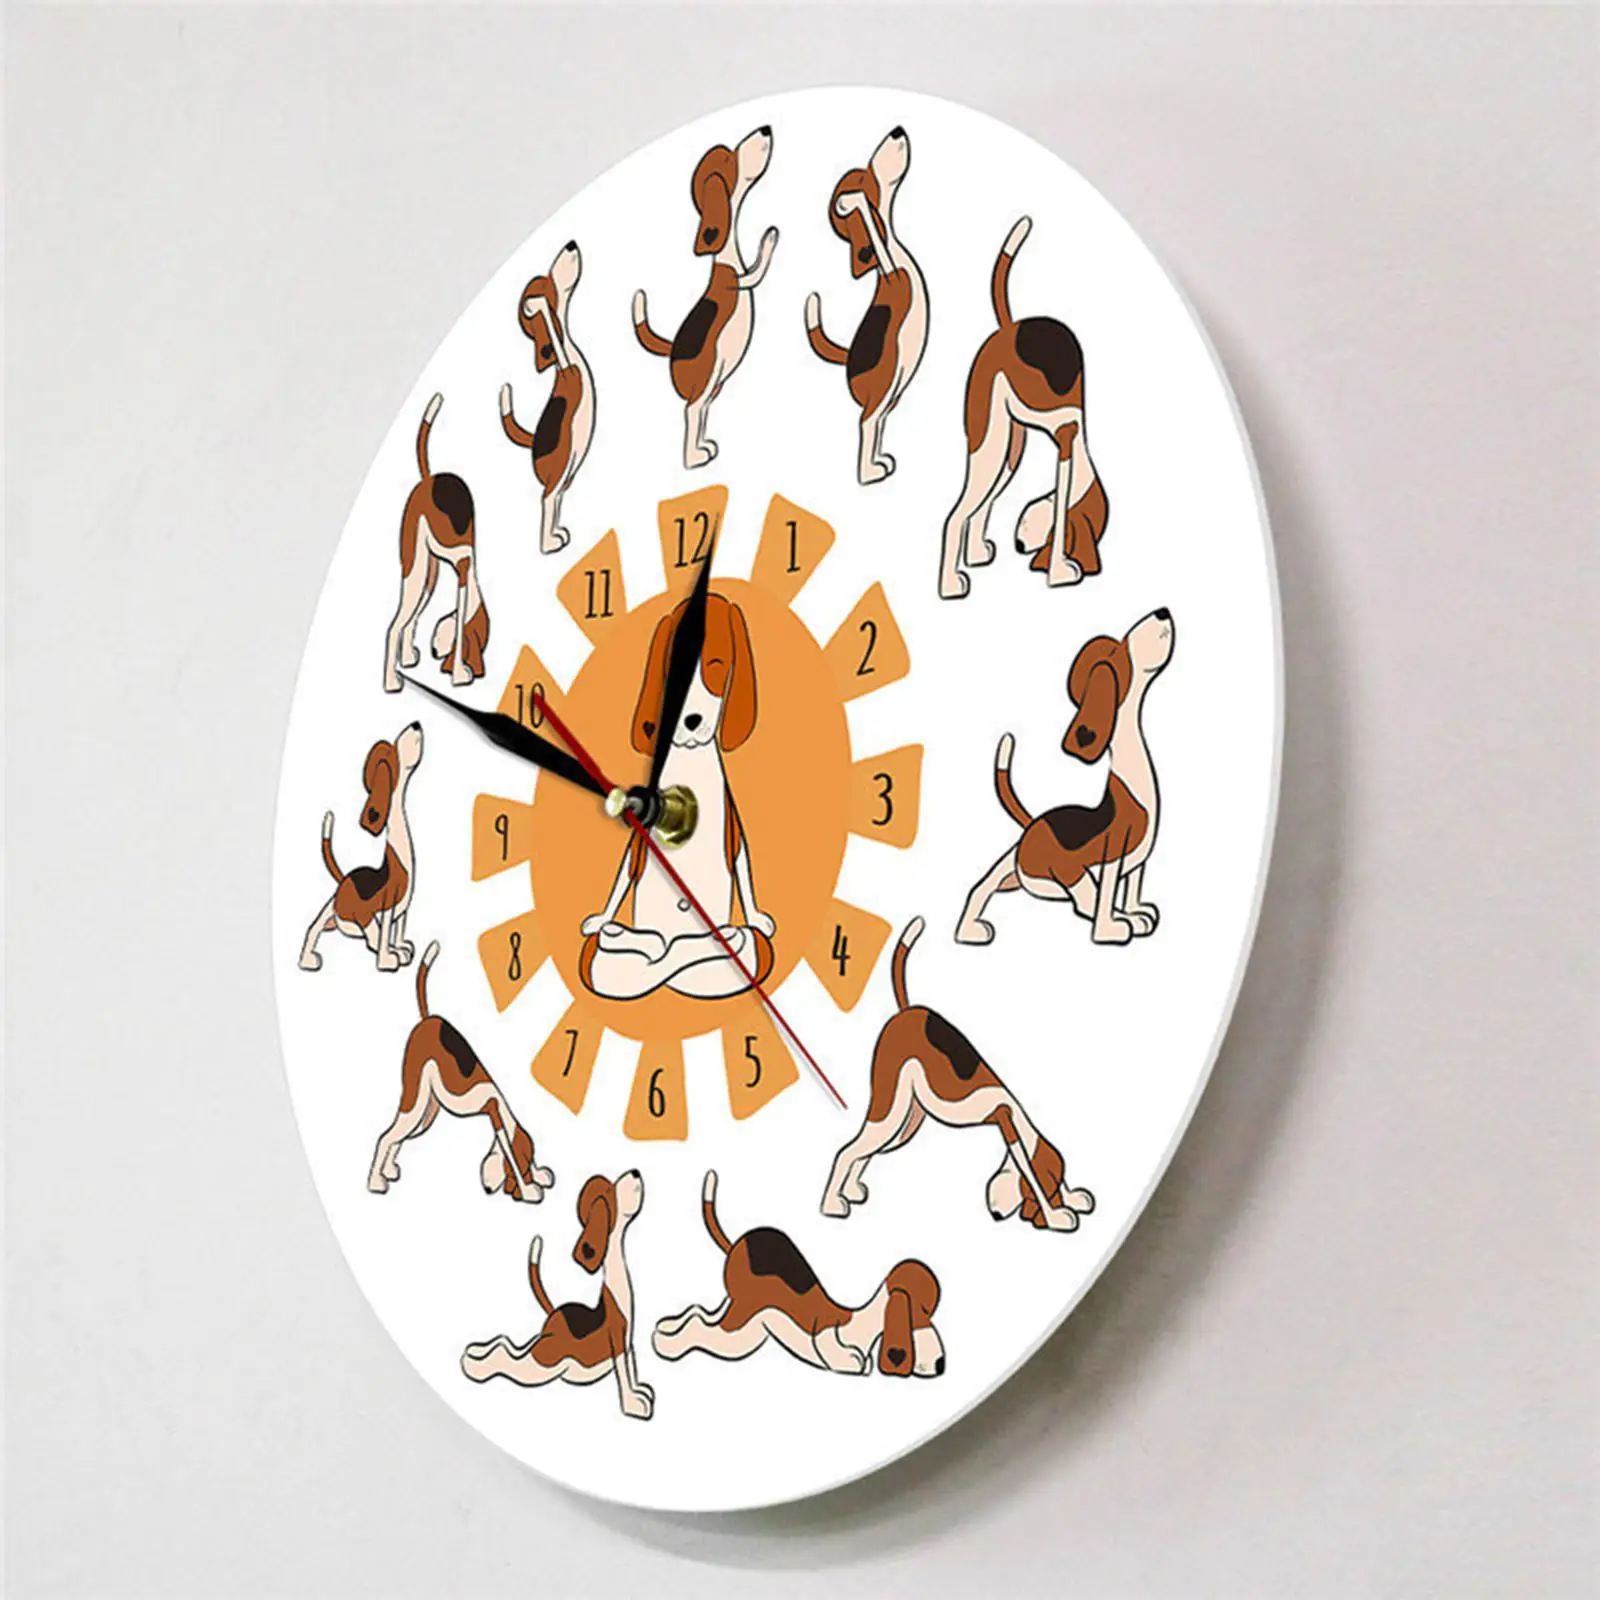 Round Dog Doing Yoga Position Wall Clocks 30cm Decoration for Kitchen Silent Easy to Read Installation Quickly Large Funny